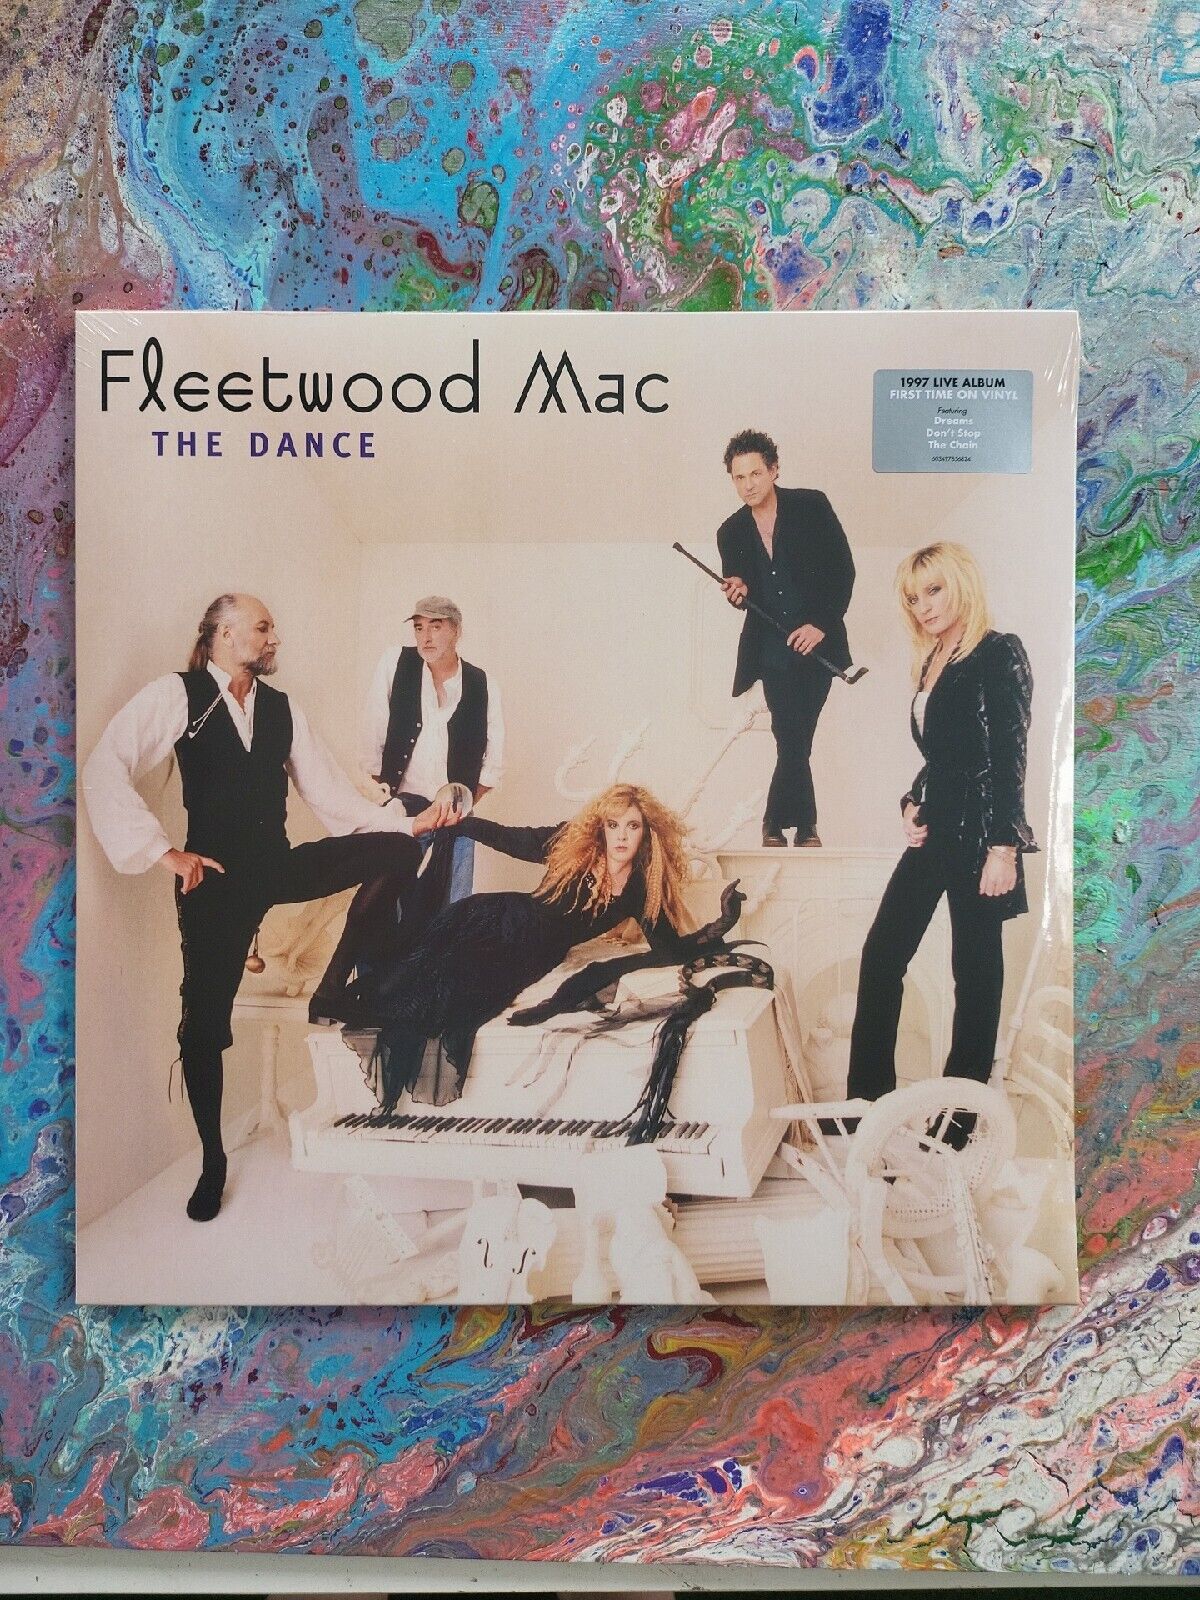 The Dance by Fleetwood Mac (Record, 2018)